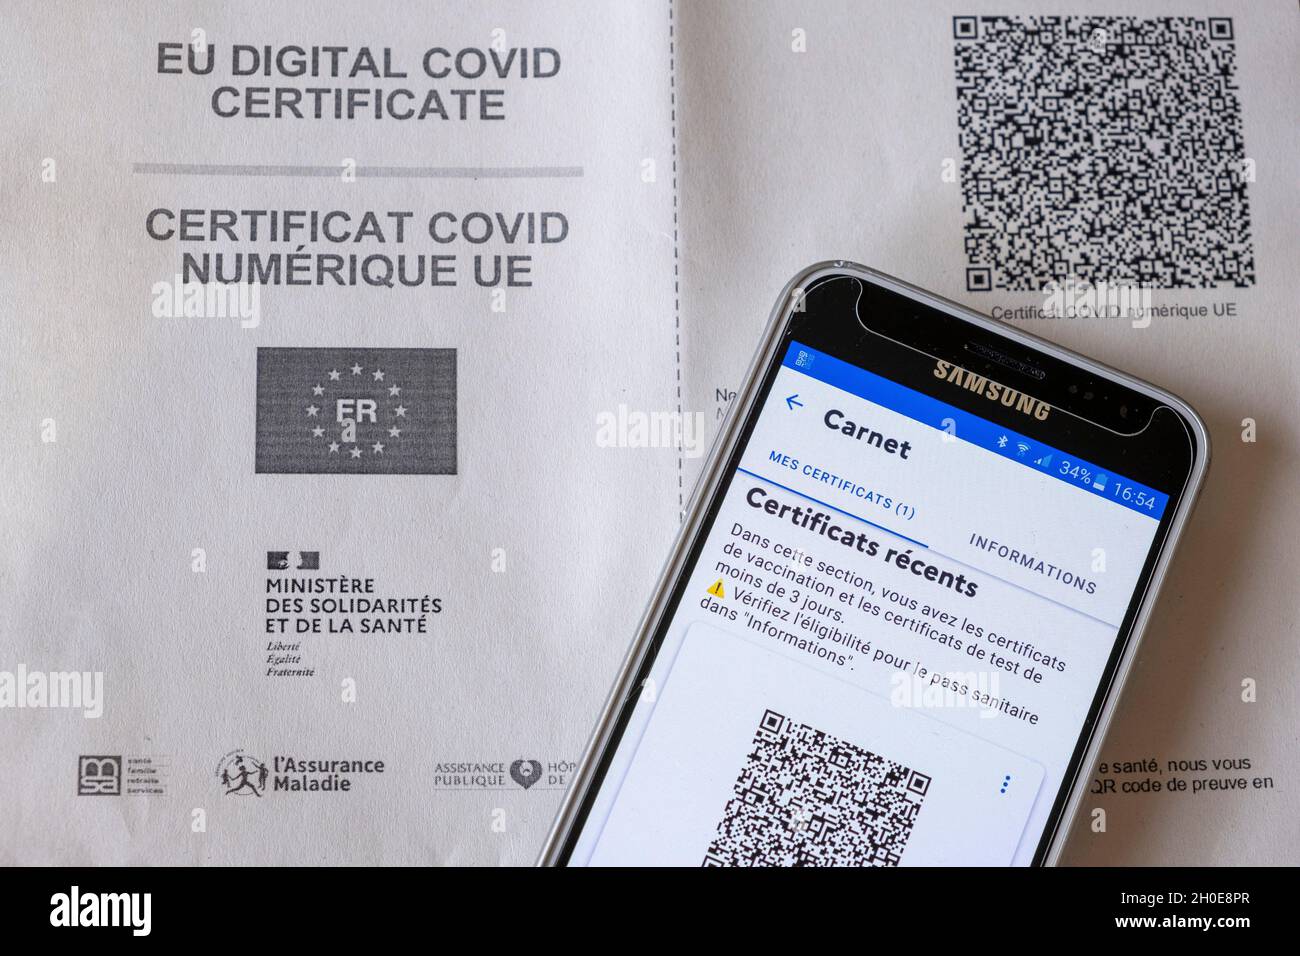 EU digital COVID Certificate, proof of vaccination. Health pass: vaccination certificate with a QR code issued after the second injection for two dose Stock Photo